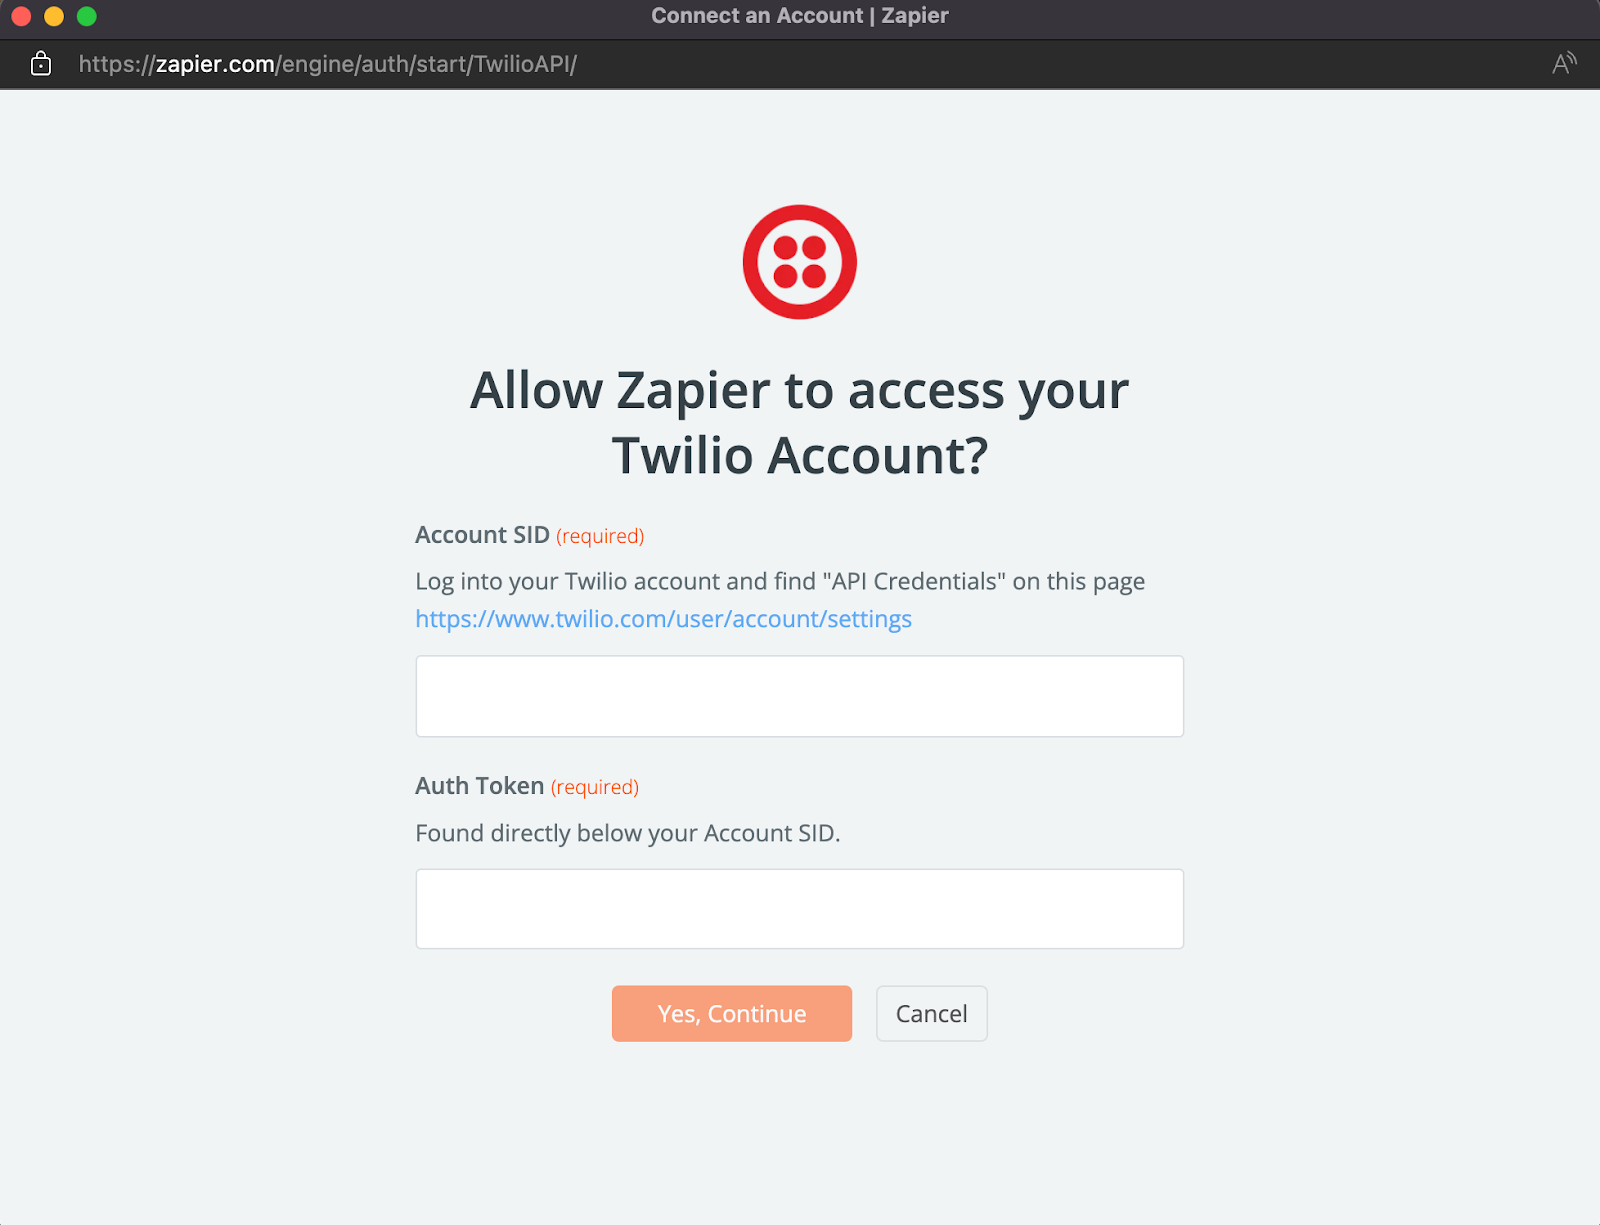 Zapier asking the user for their Twilio Account SID and Auth Token.